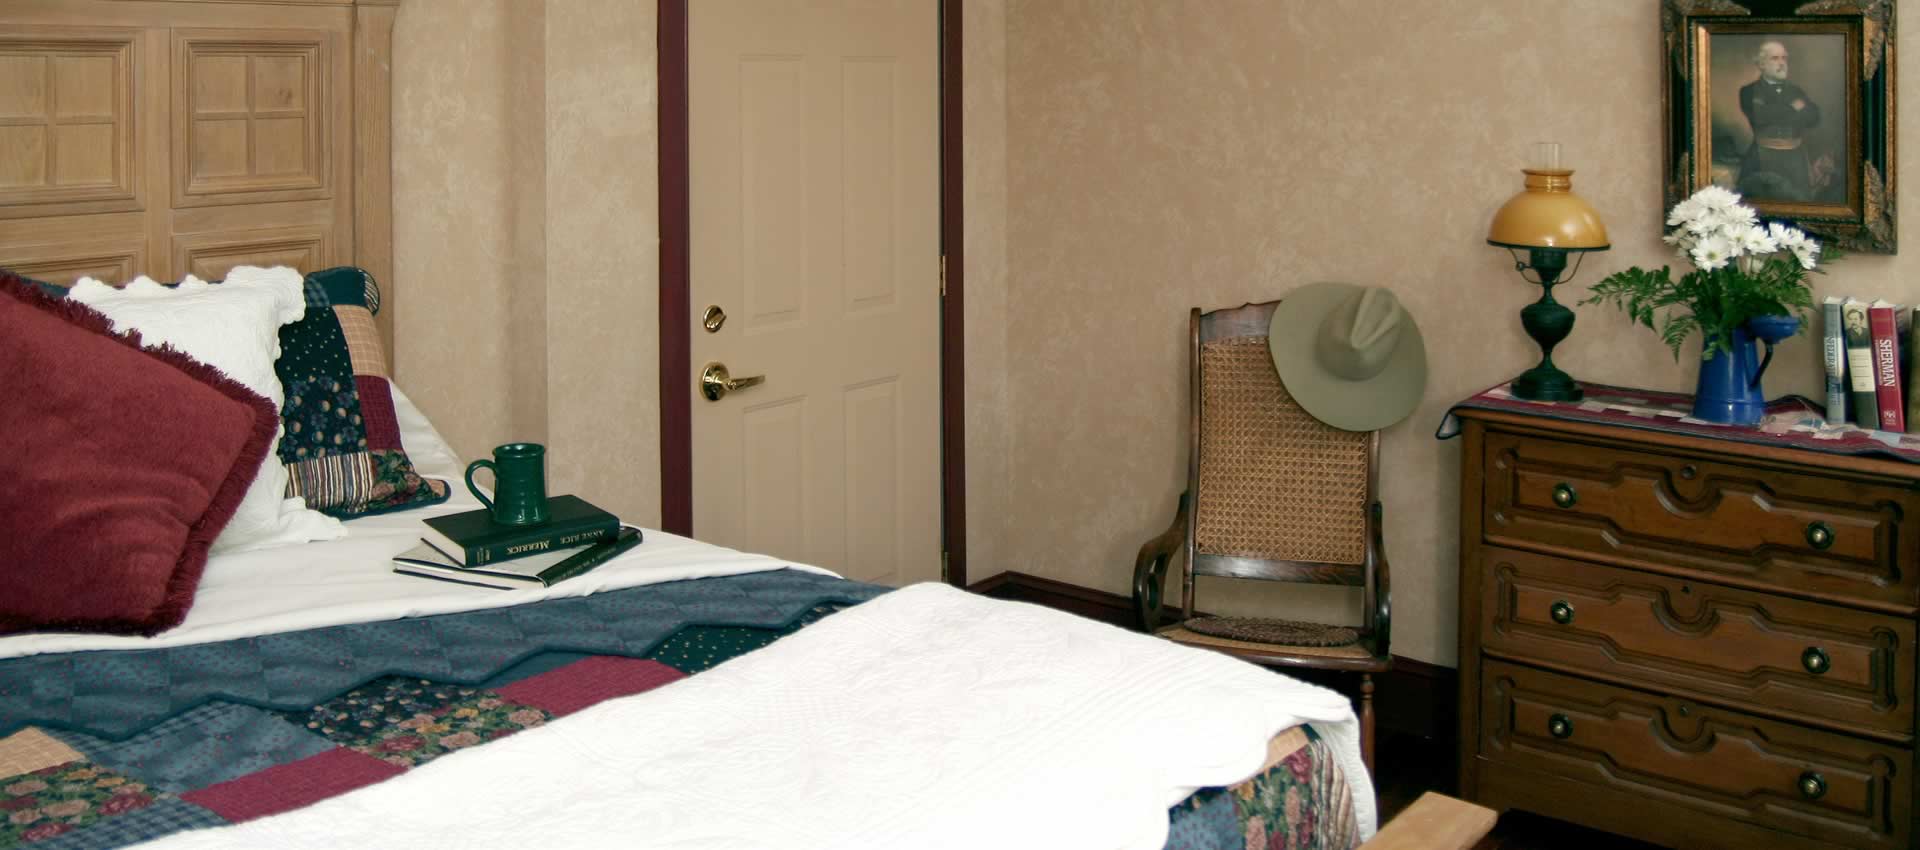 Officer’s Quarterss bed and dresser, chair and hat